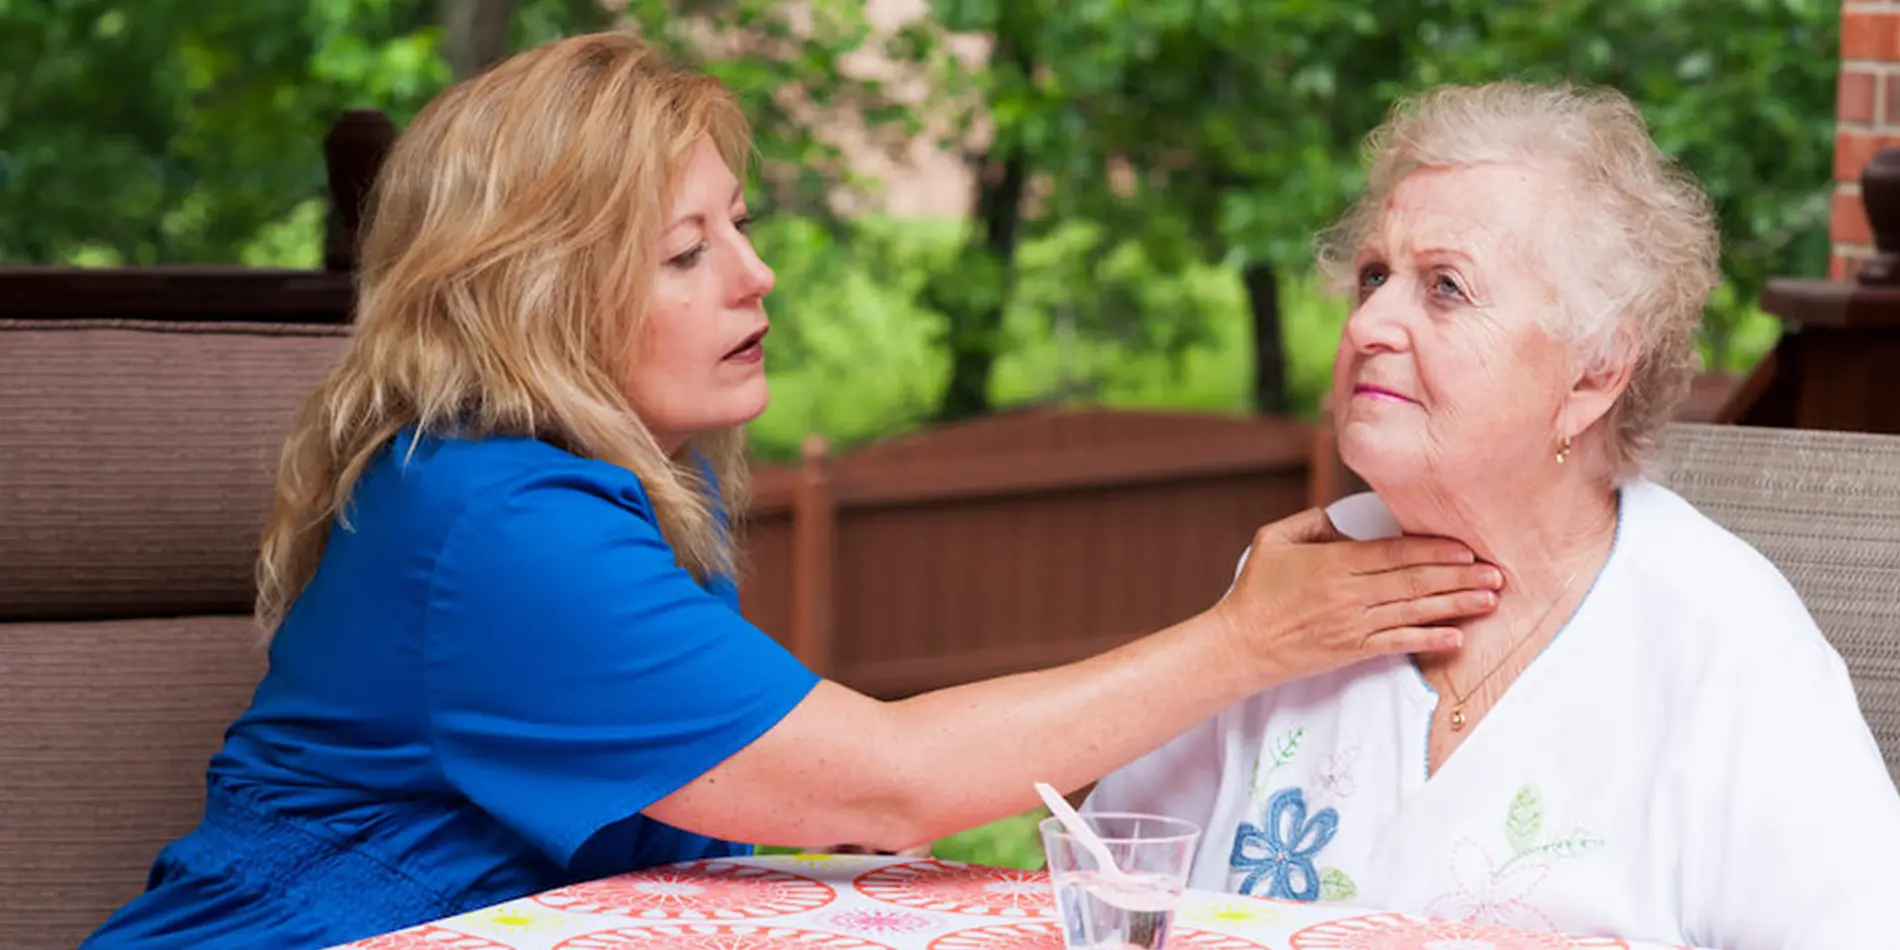 A medical speech-language pathologist has their hand on the throat of an older person. They are outside.